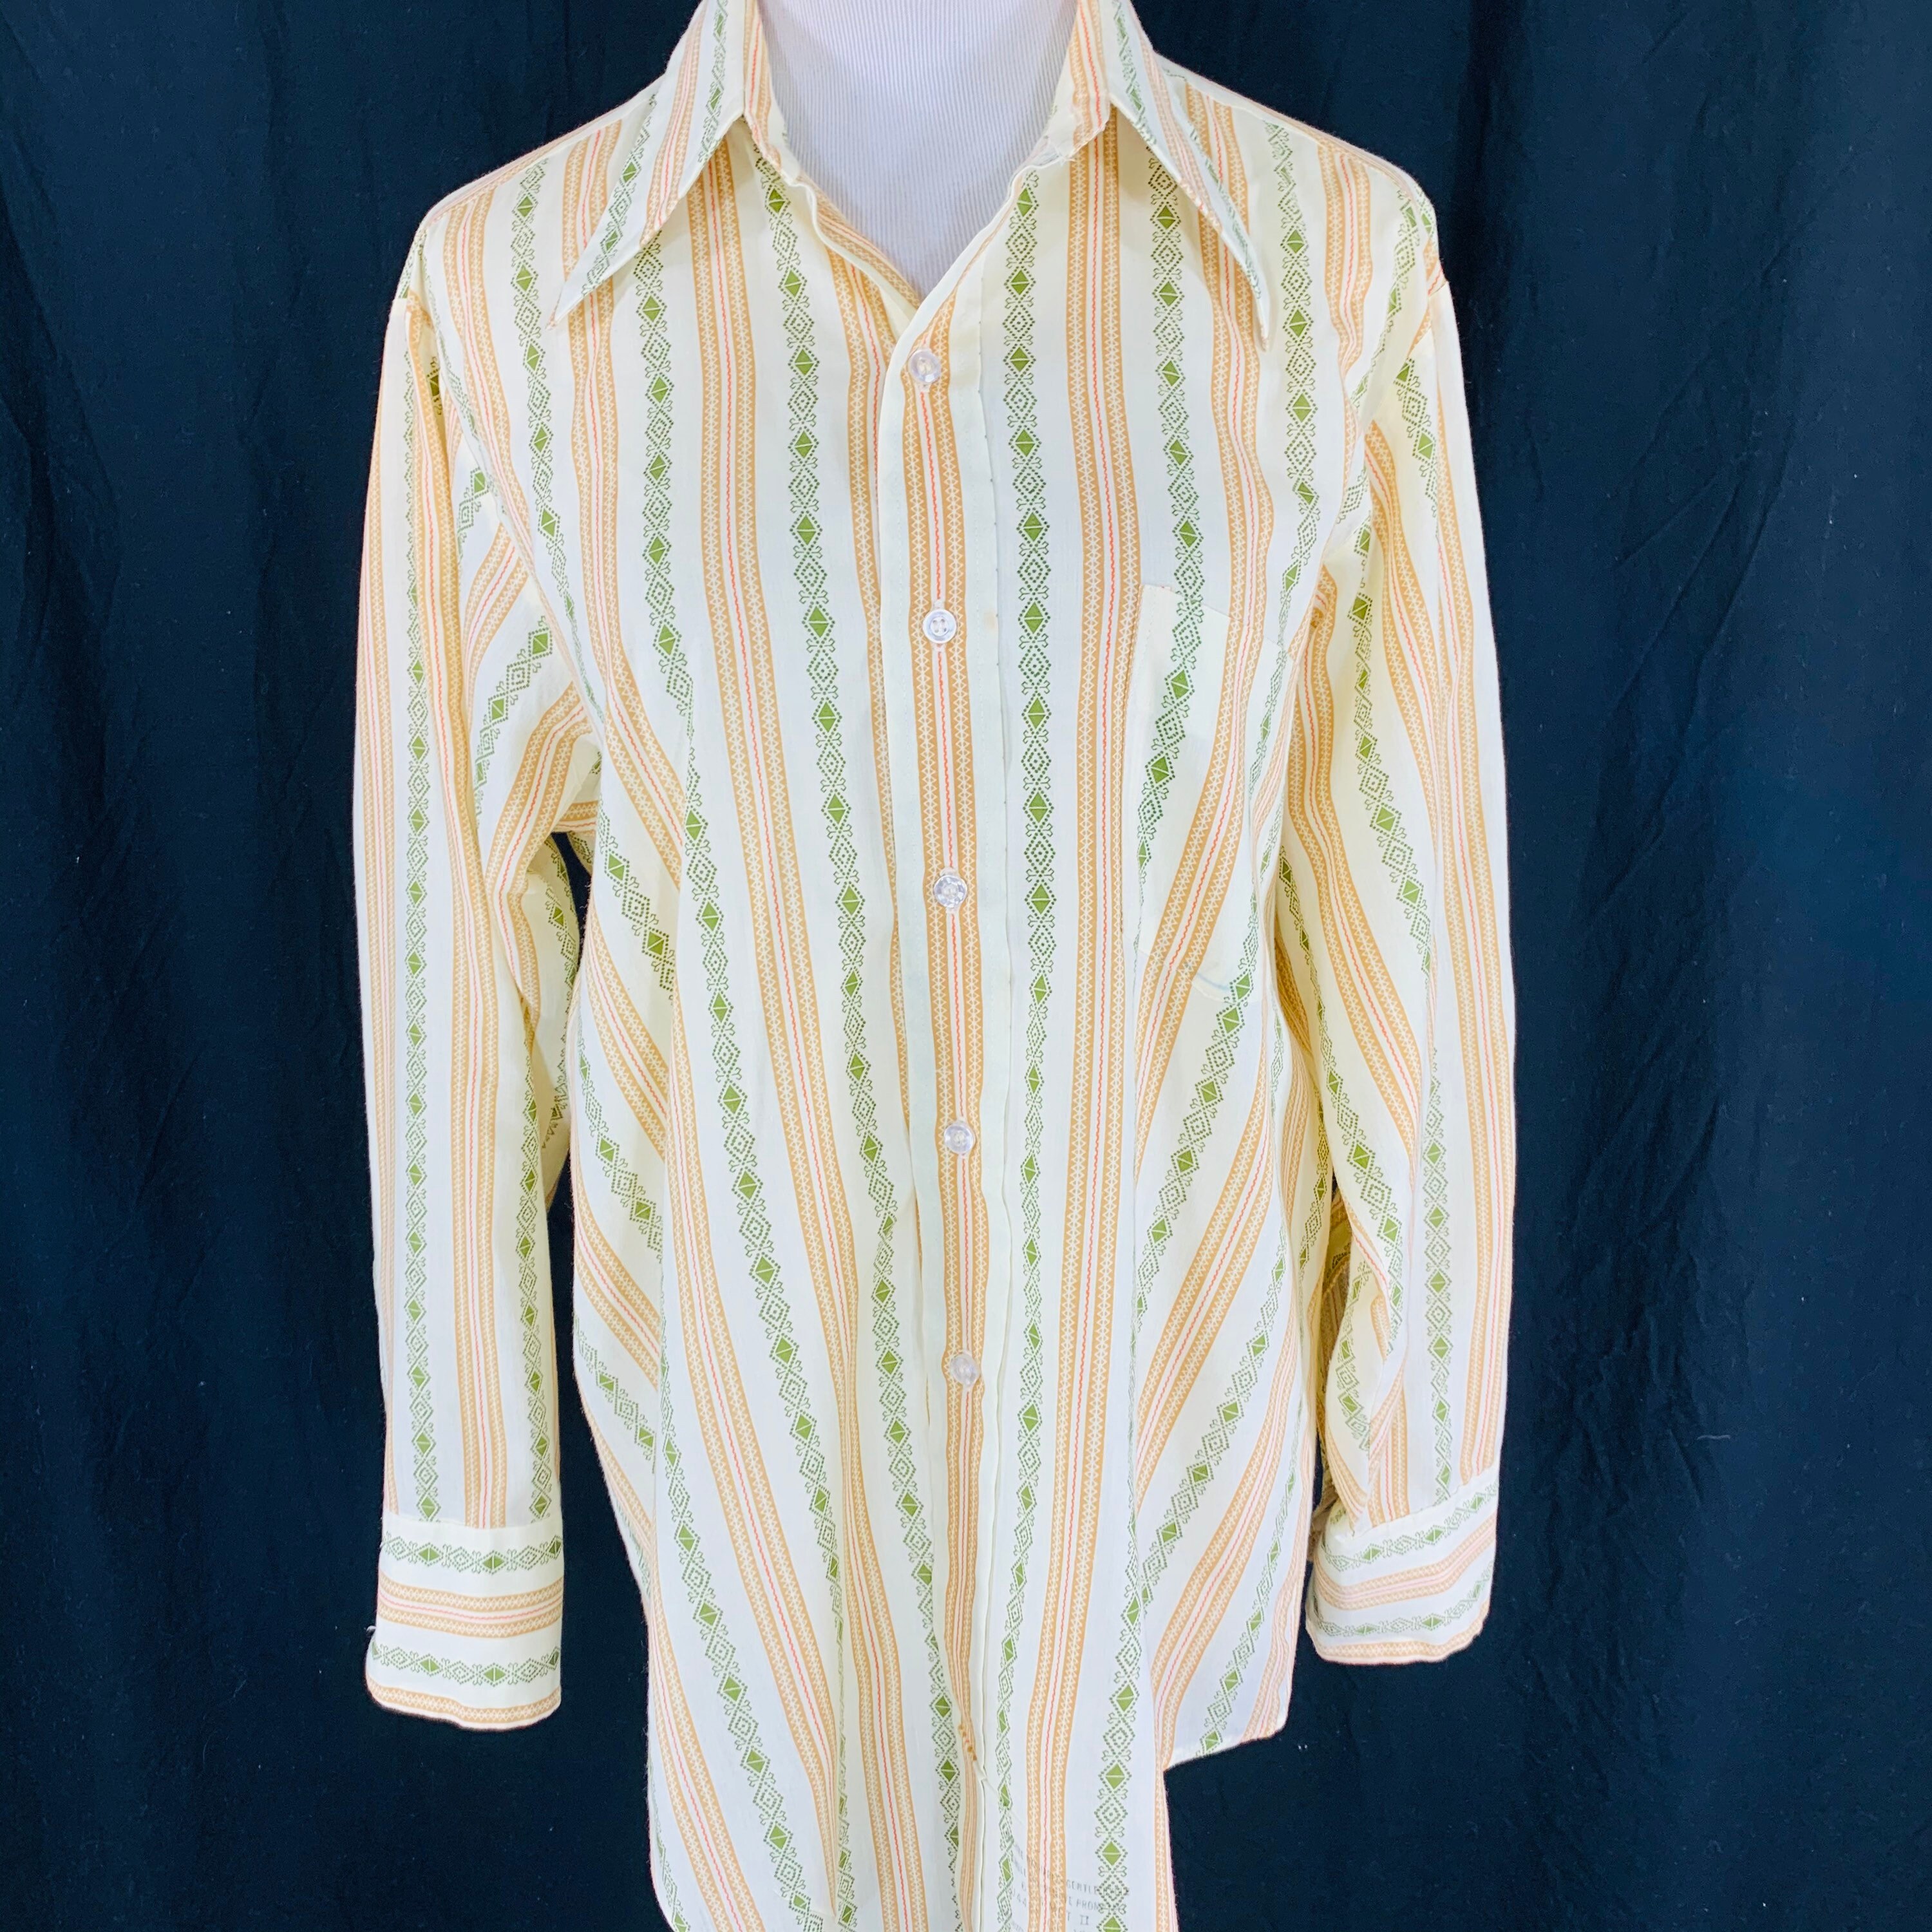 Vintage men\u2019s shirt 1970s new old stock Kent Collection by Arrow long sleeves striped size 15 12 32 Decton fabric